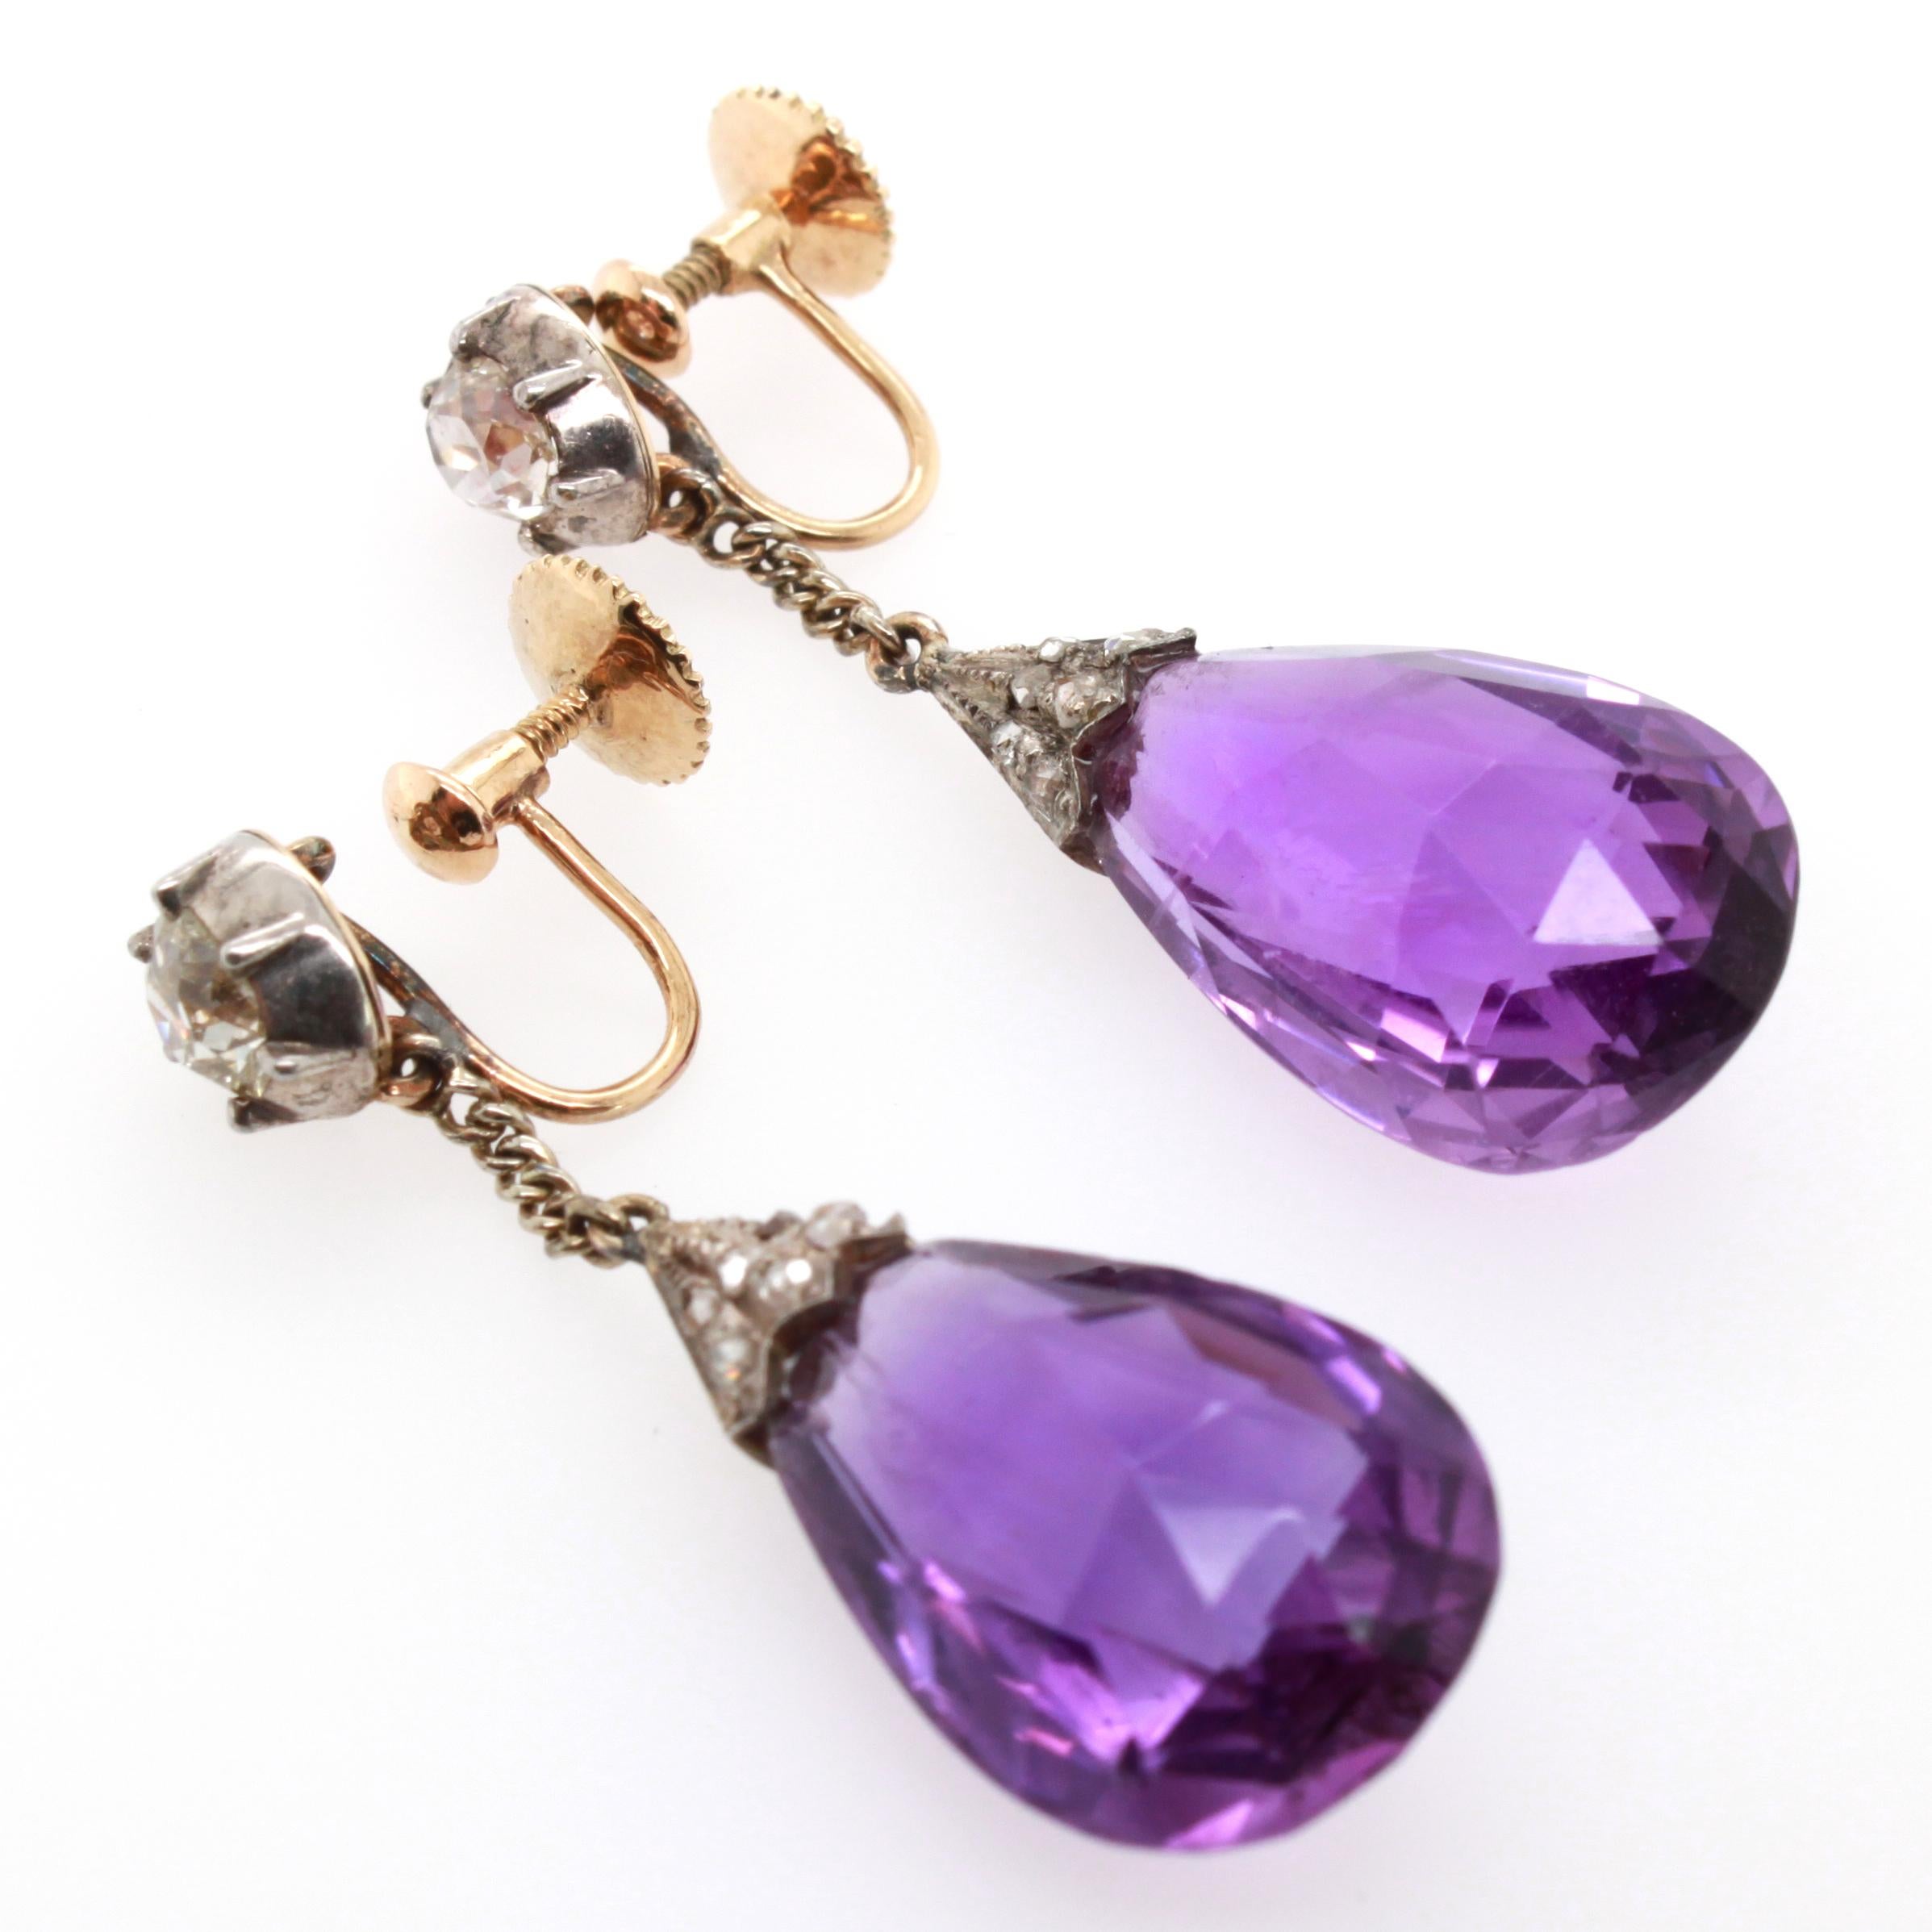 Fine antique early Victorian Siberian amethyst earrings with additional diamonds from mid 19th century.
The amethyst have an intense violet color with red flashes and are cut in a beautiful old briolette shape set with additional rose and old cut